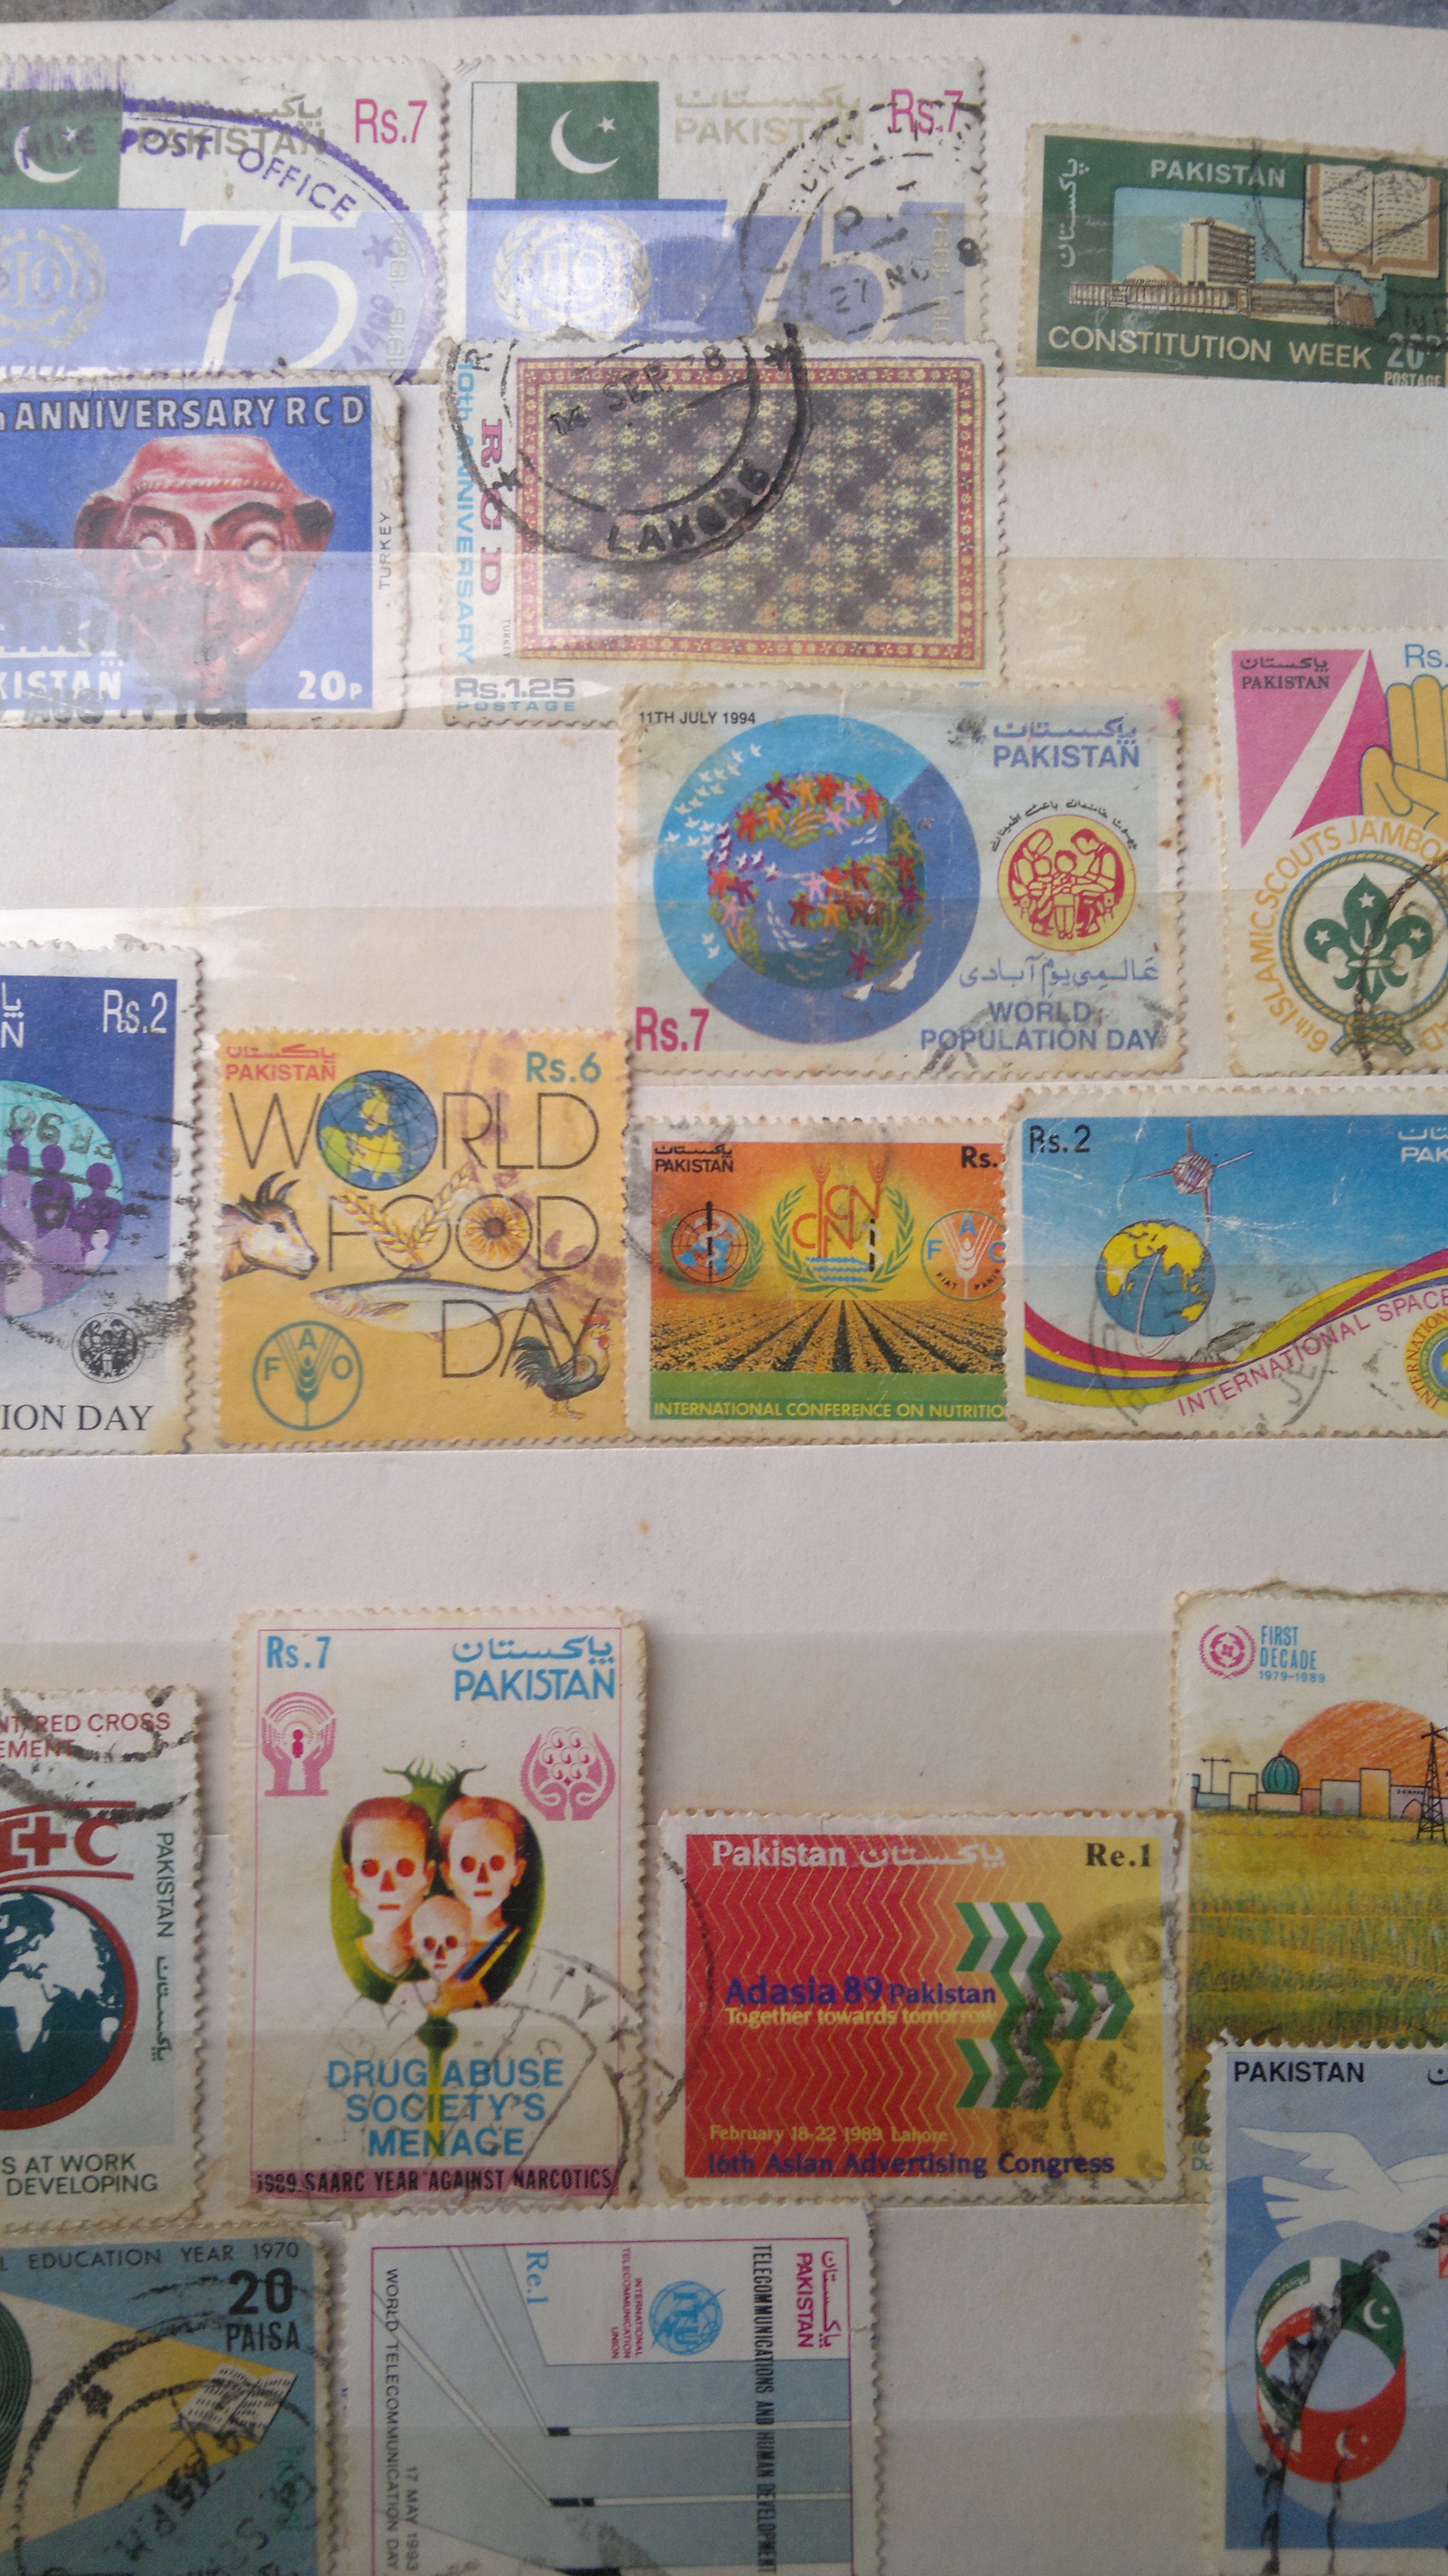 stamps featuring different international organizations and programs